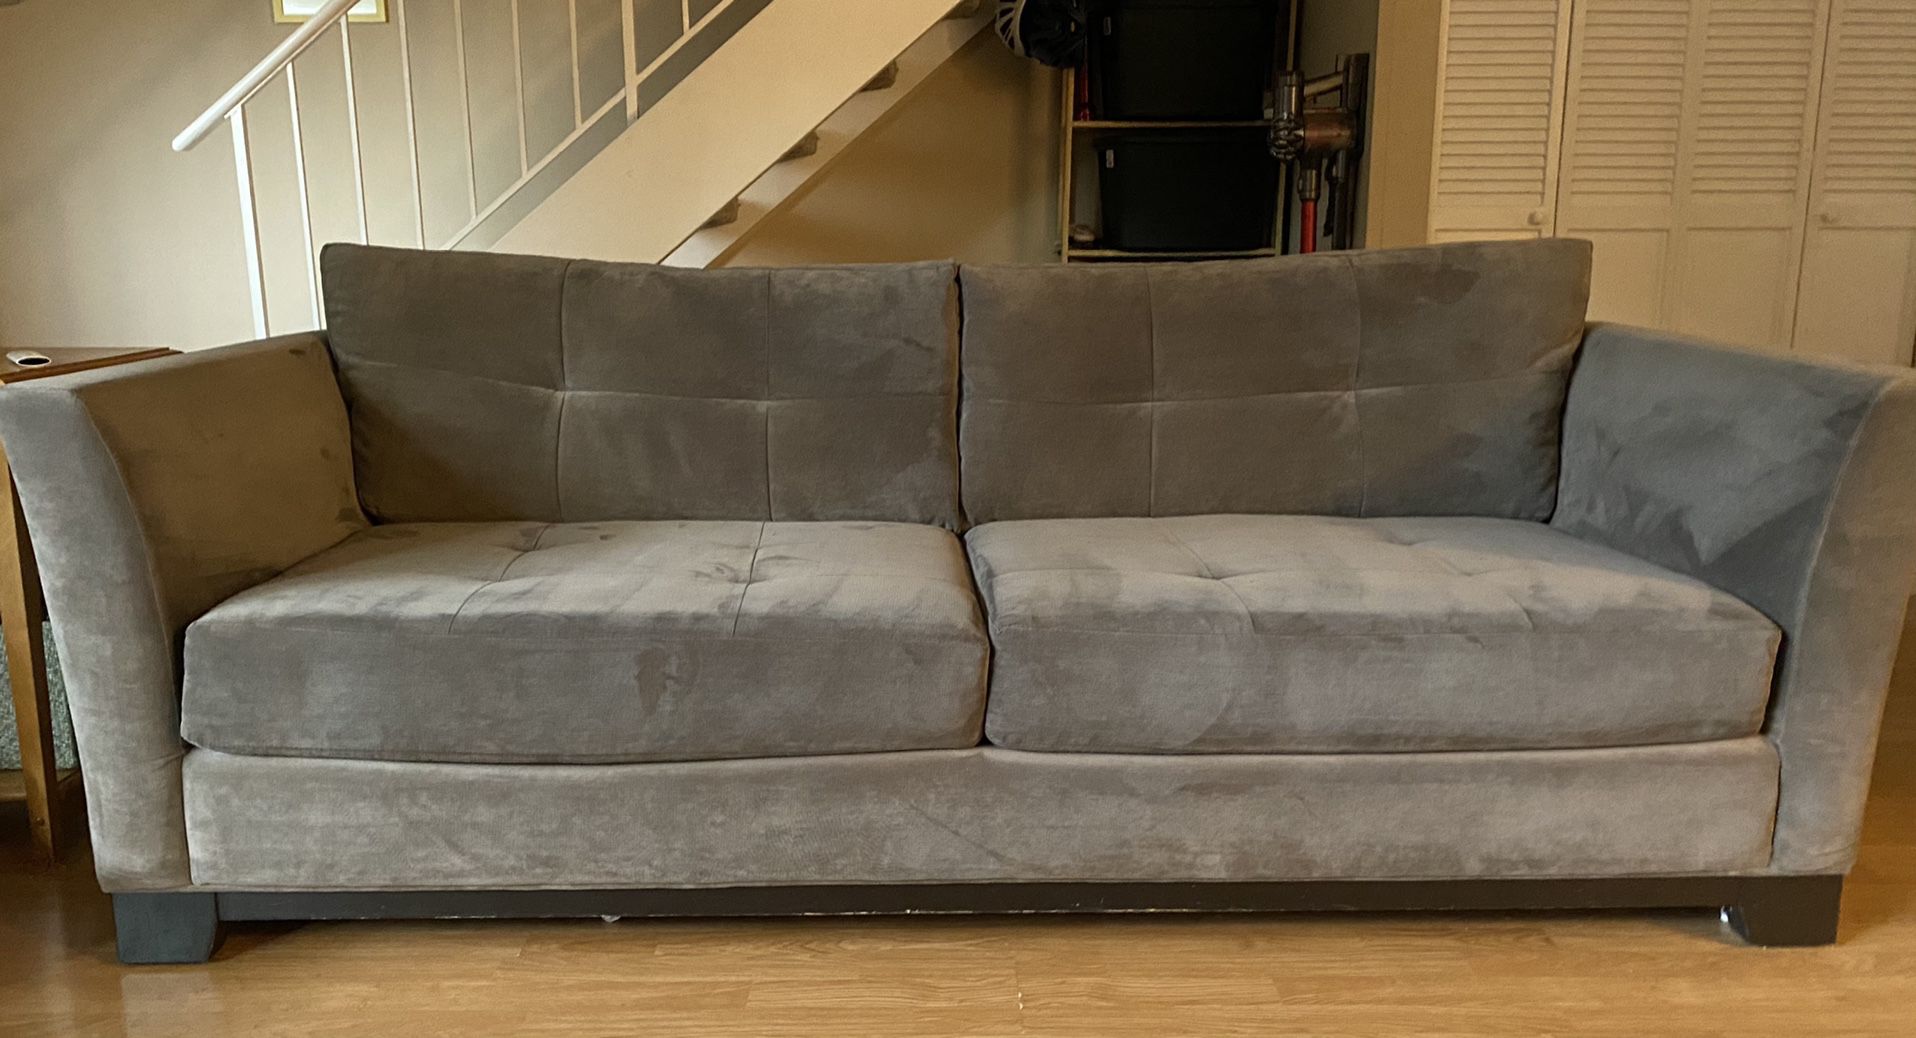 Macy’s Couch FREE PICKUP TODAY